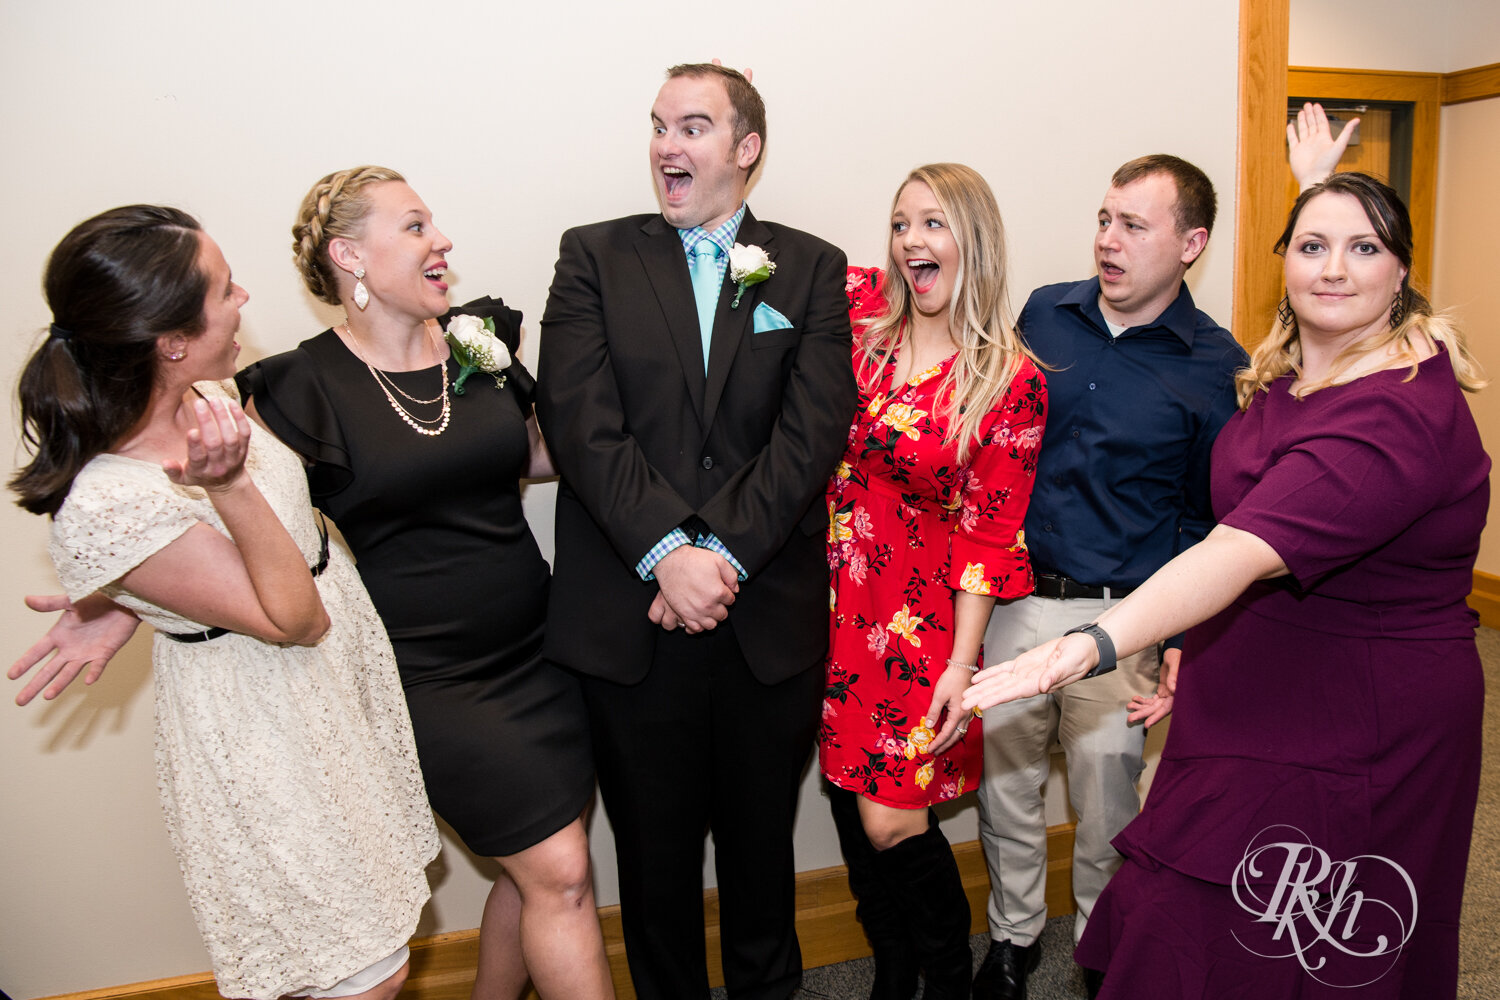 Guests laugh with groom at wedding reception at Eagan Community Center in Eagan, Minnesota.